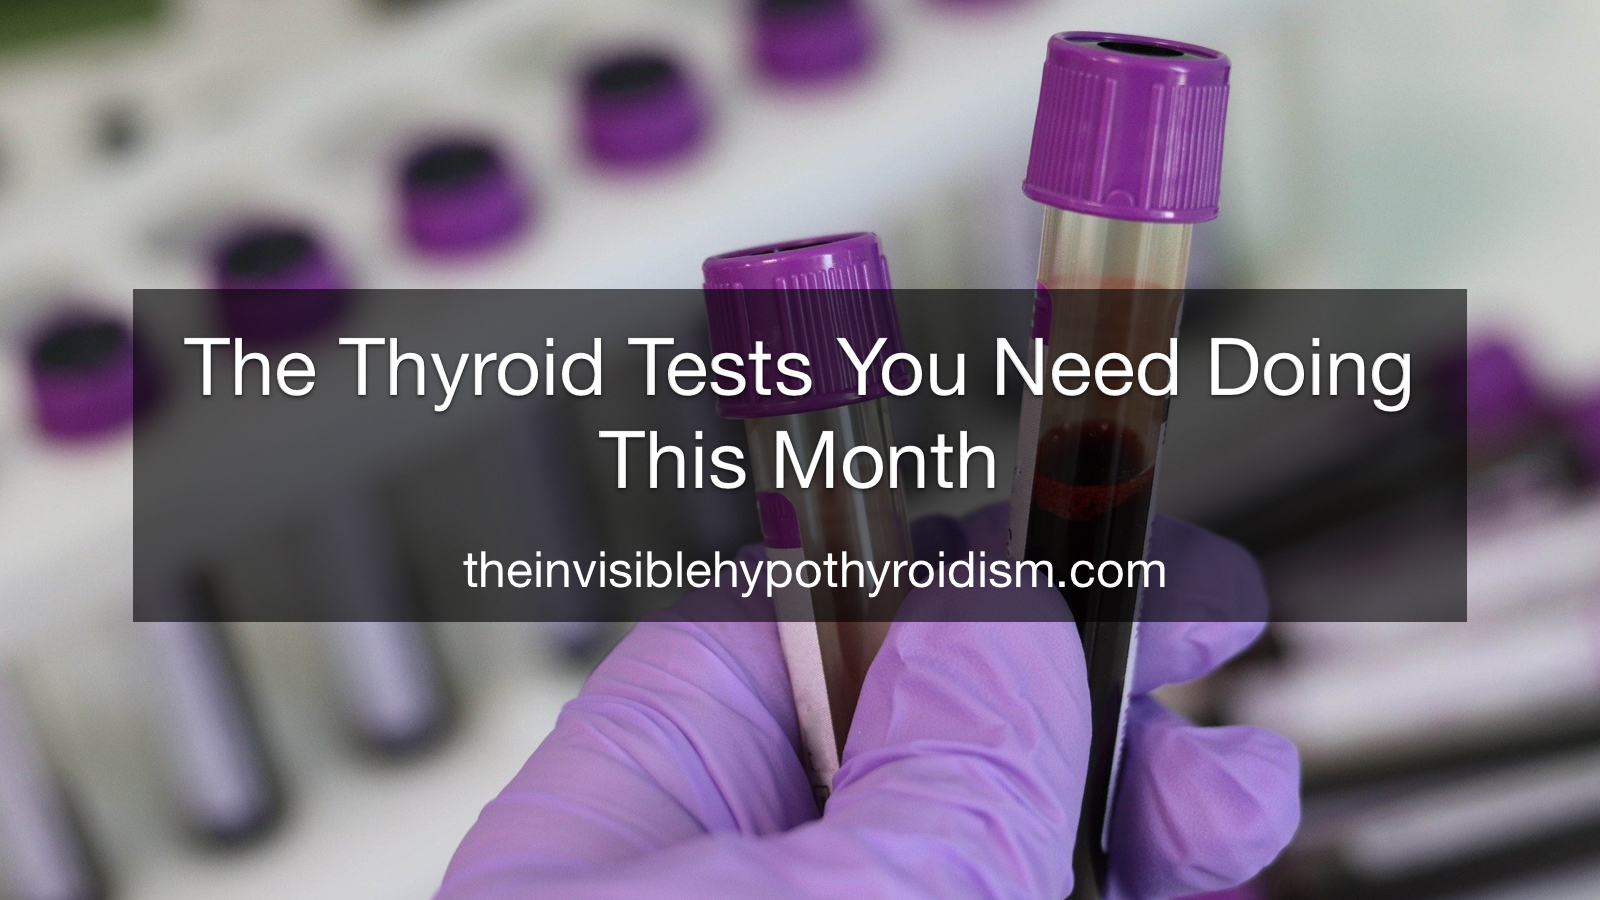 The Thyroid Tests You Need Doing This Month